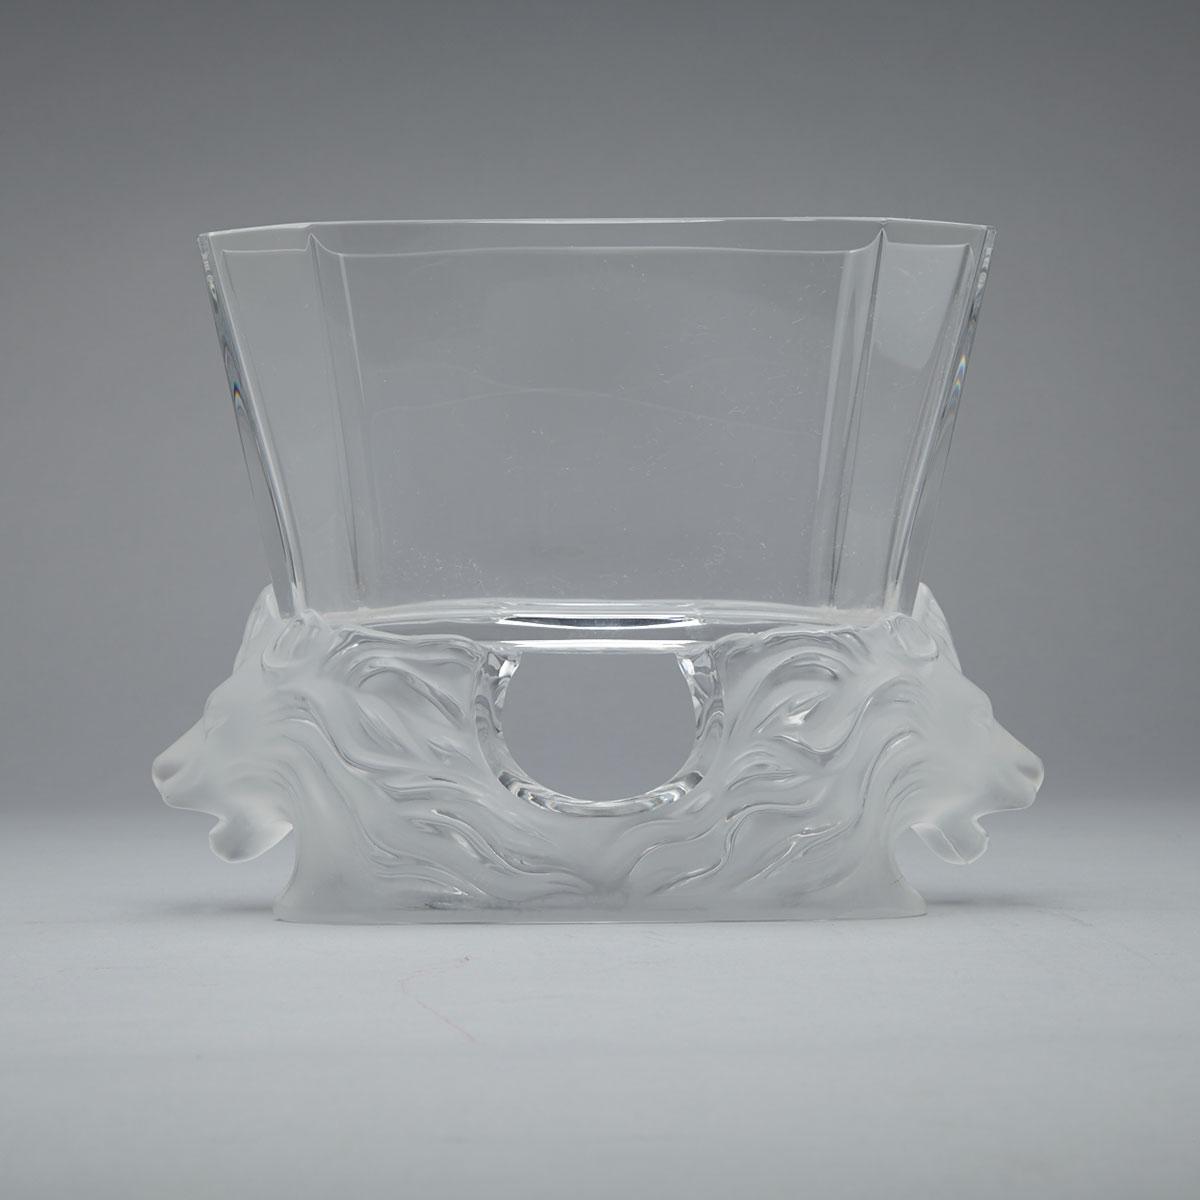 ‘Lions’, Lalique Moulded and Partly Frosted Glass Vase, post-1945